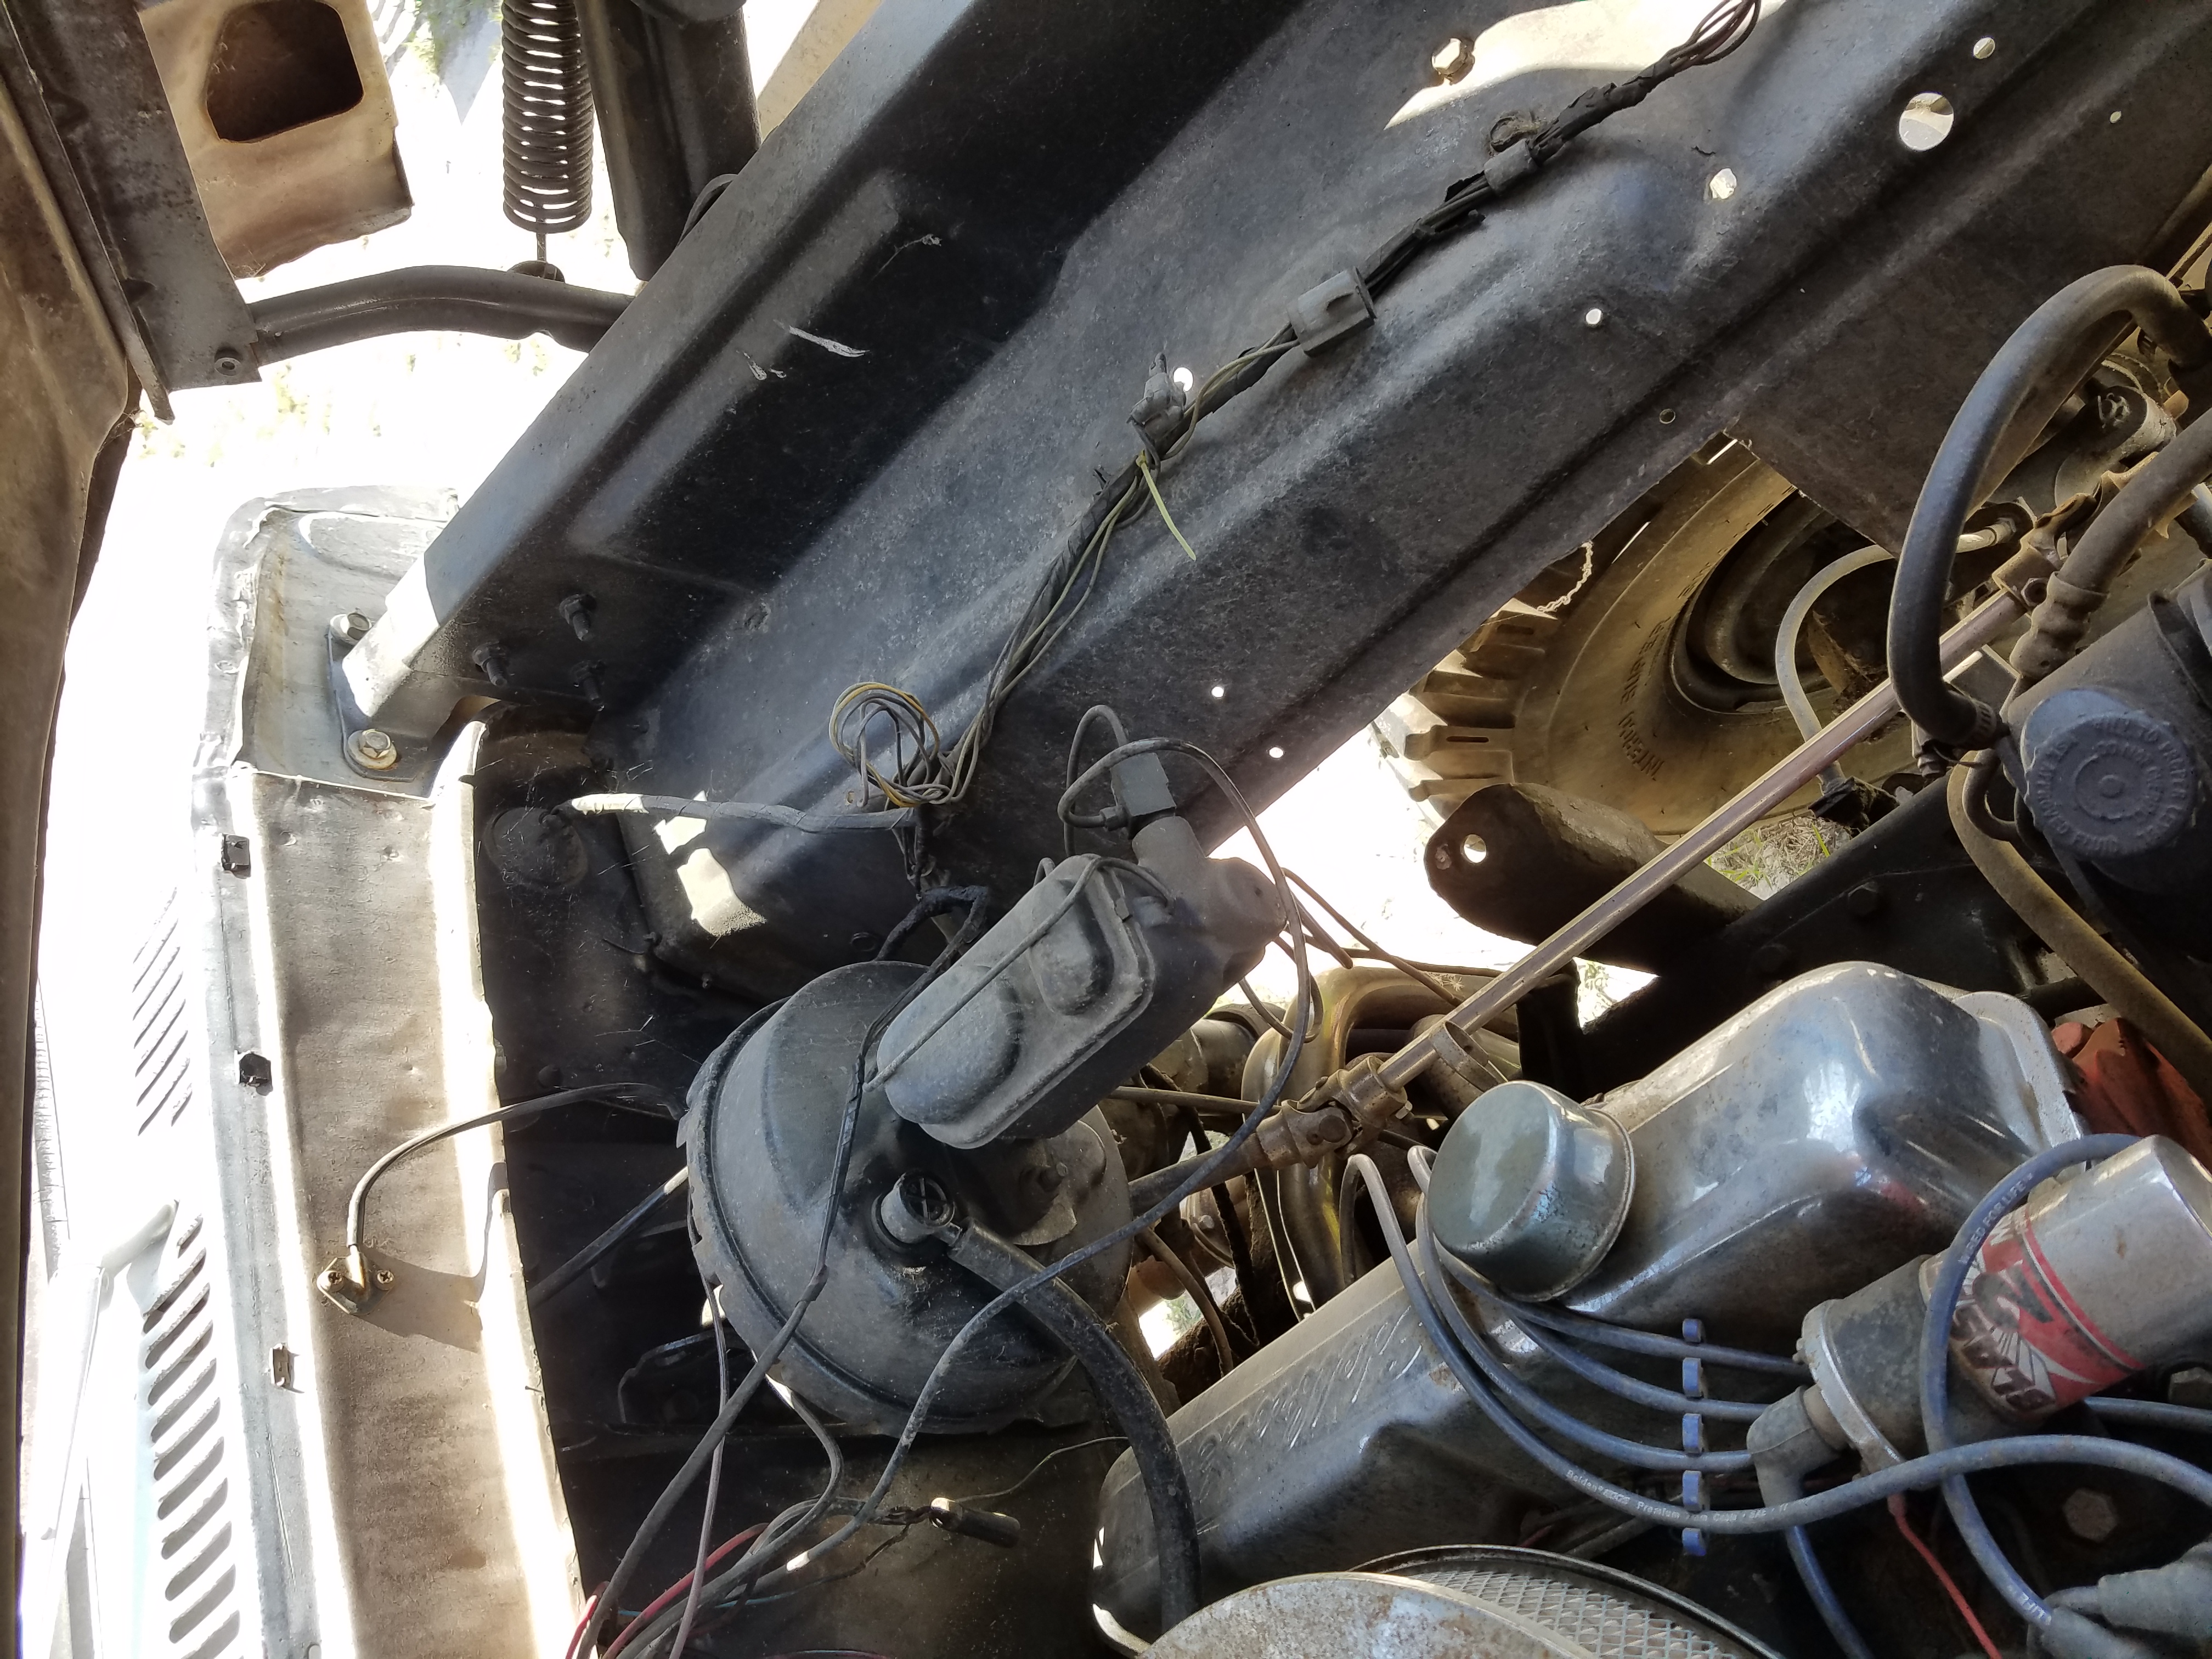 74 F250 ignition wiring - Ford Truck Enthusiasts Forums